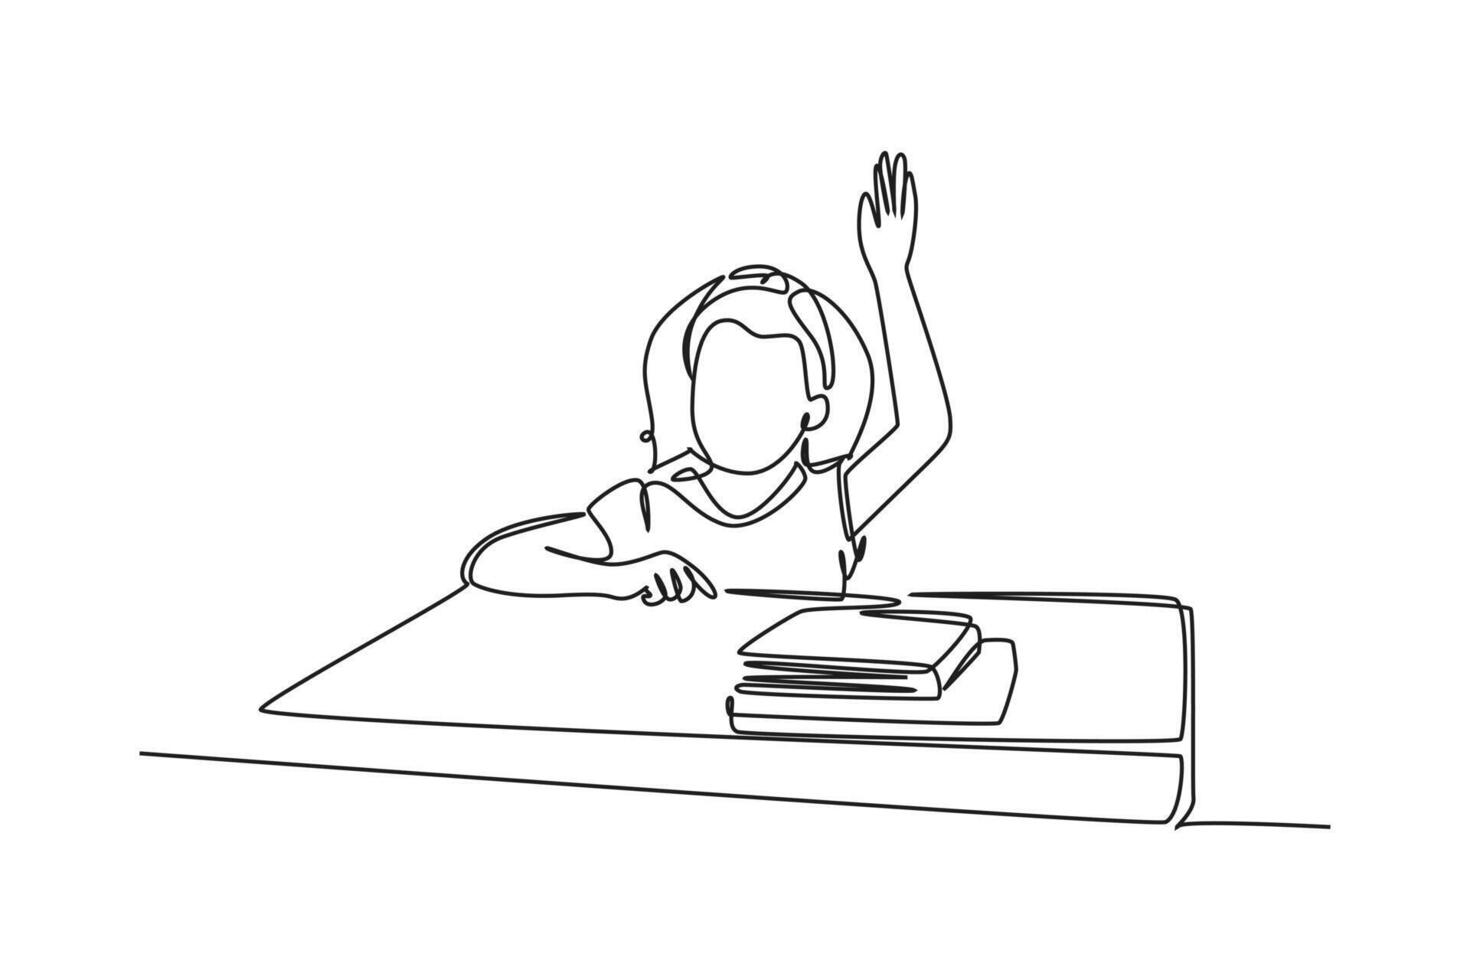 Continuous one line drawing Concept of studying in class and lab. Doodle vector illustration.